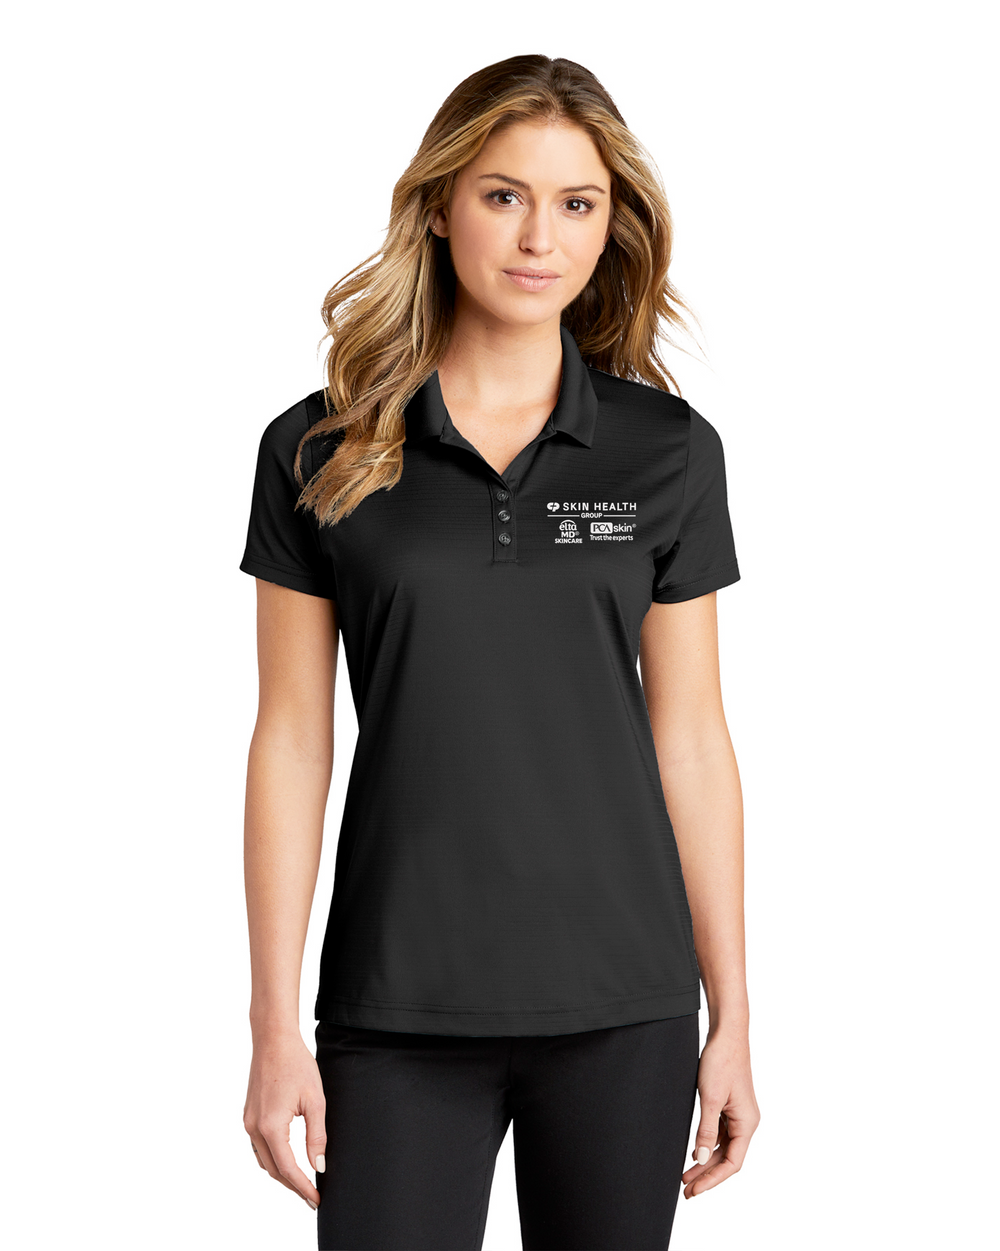 CP Skin Health Apparel - Port Authority Ladies Eclipse Stretch Polo - LK587